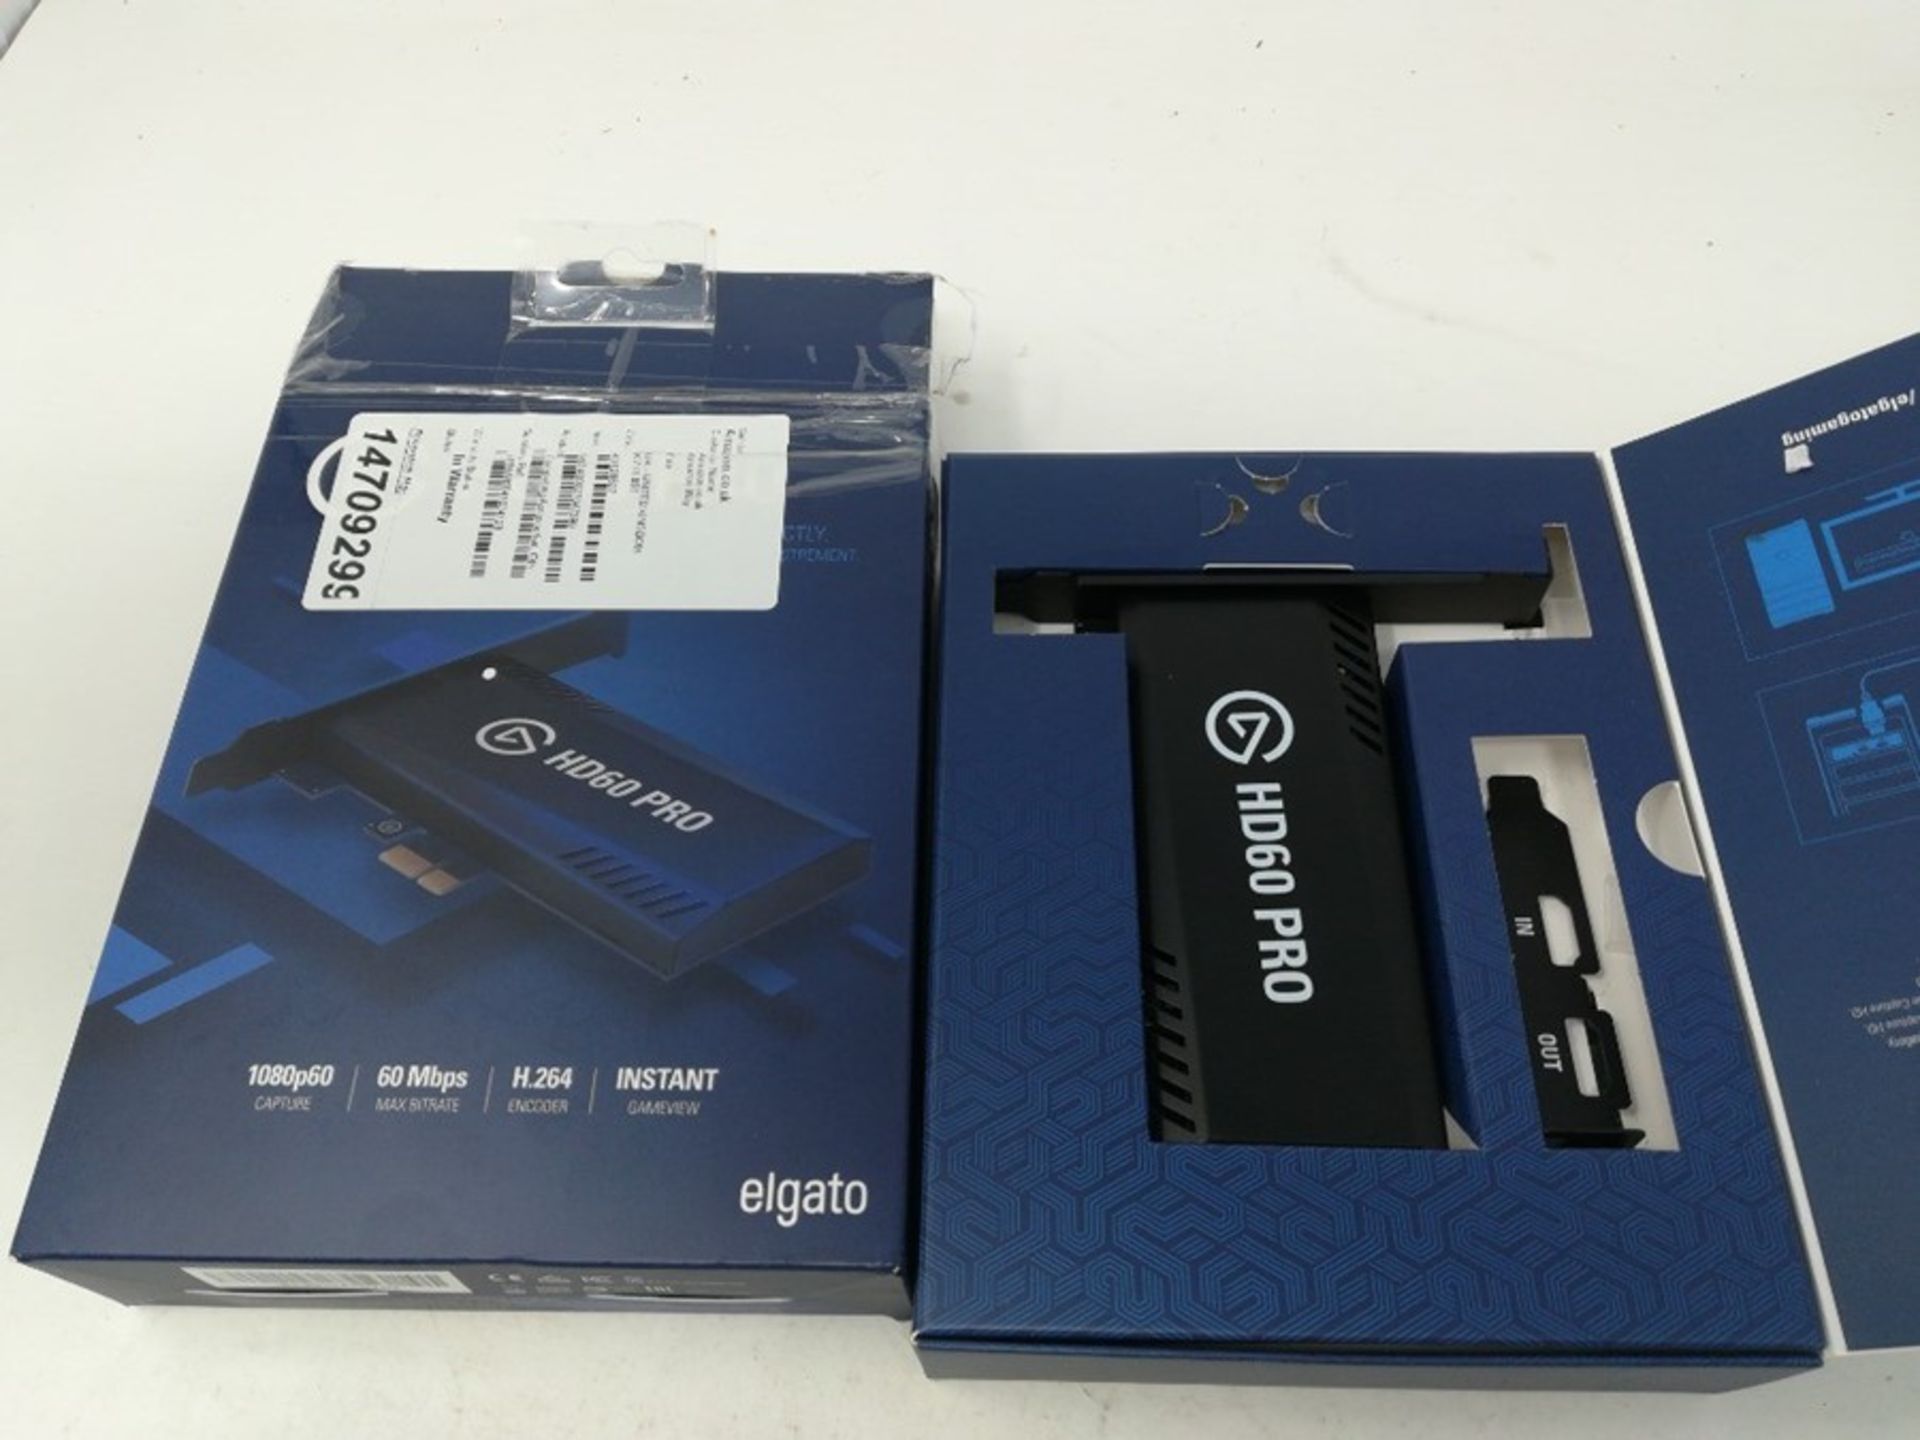 RRP £125.00 Elgato HD60 Pro Capture Card, 1080p 60 Capture and Passthrough, PCIe Capture Card, Low - Image 2 of 2